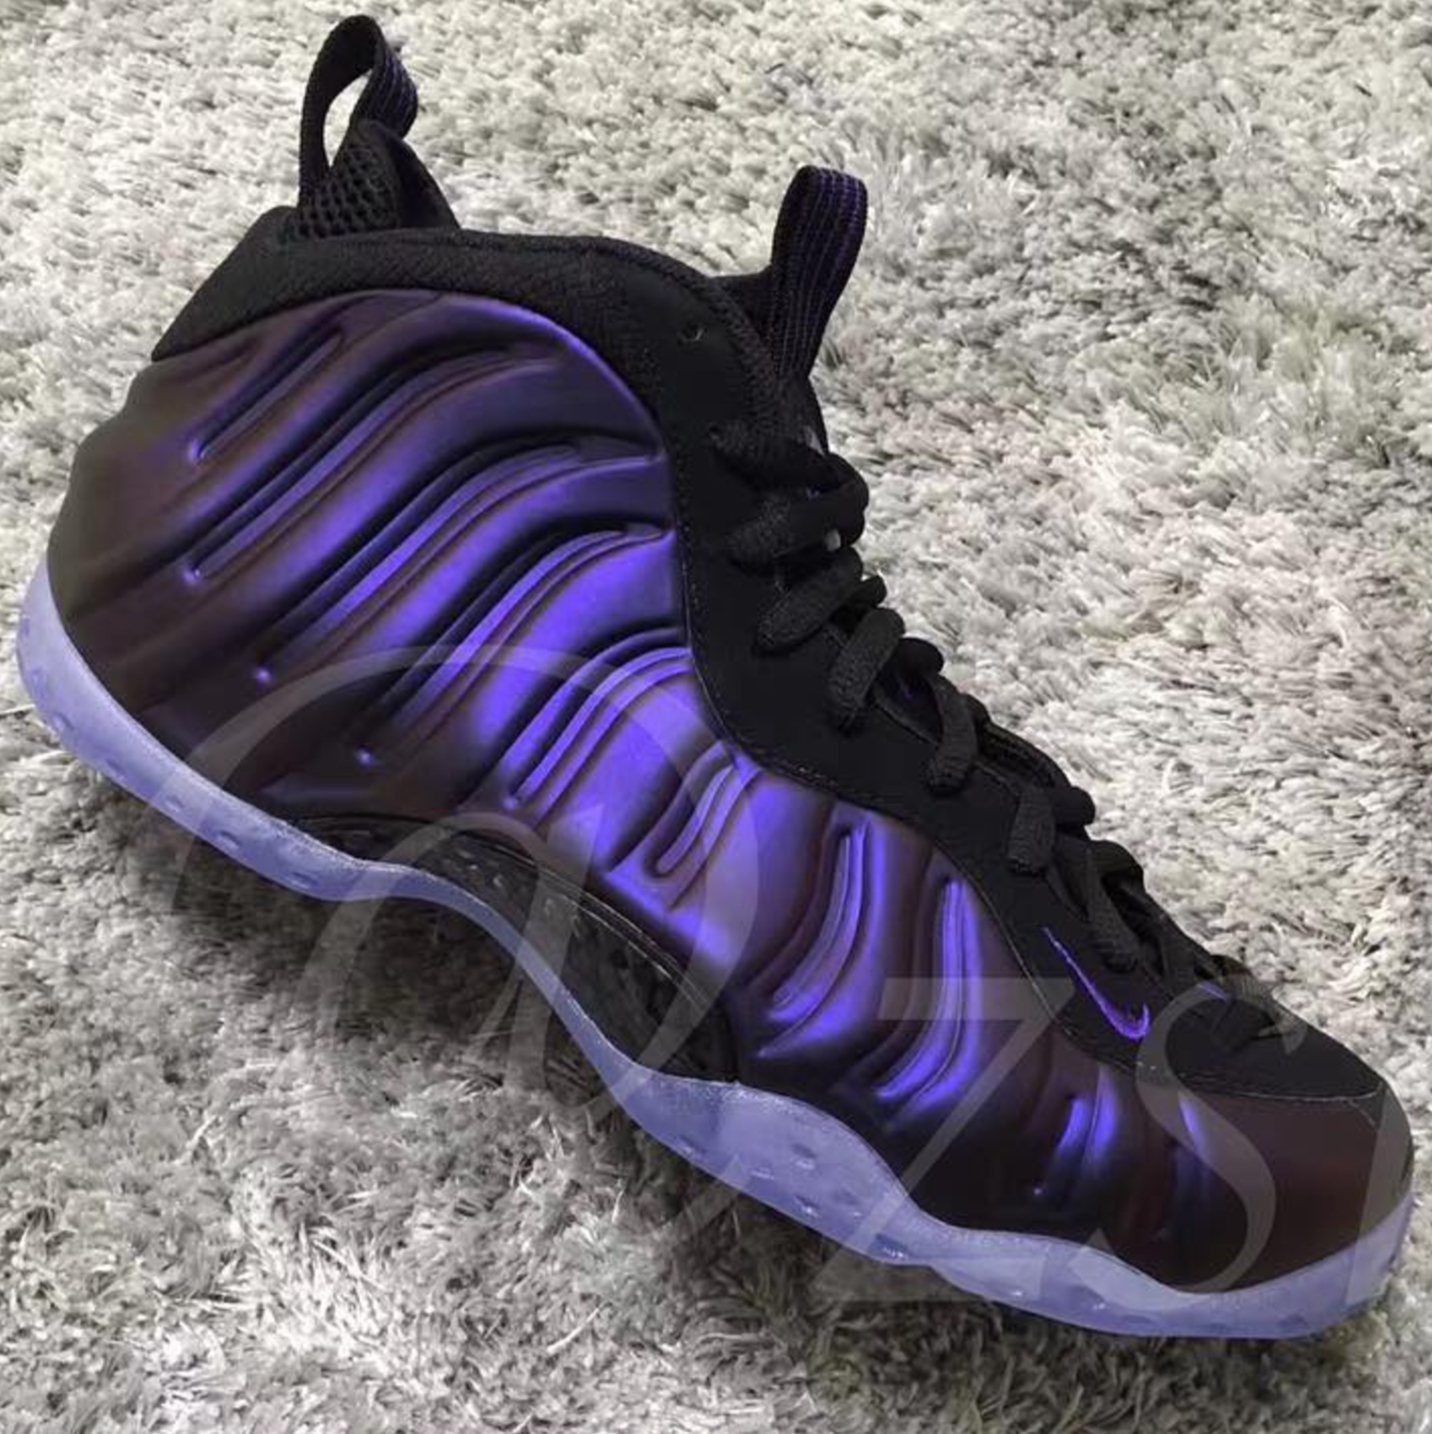 The 'Eggplant' Nike Foamposite May Be 